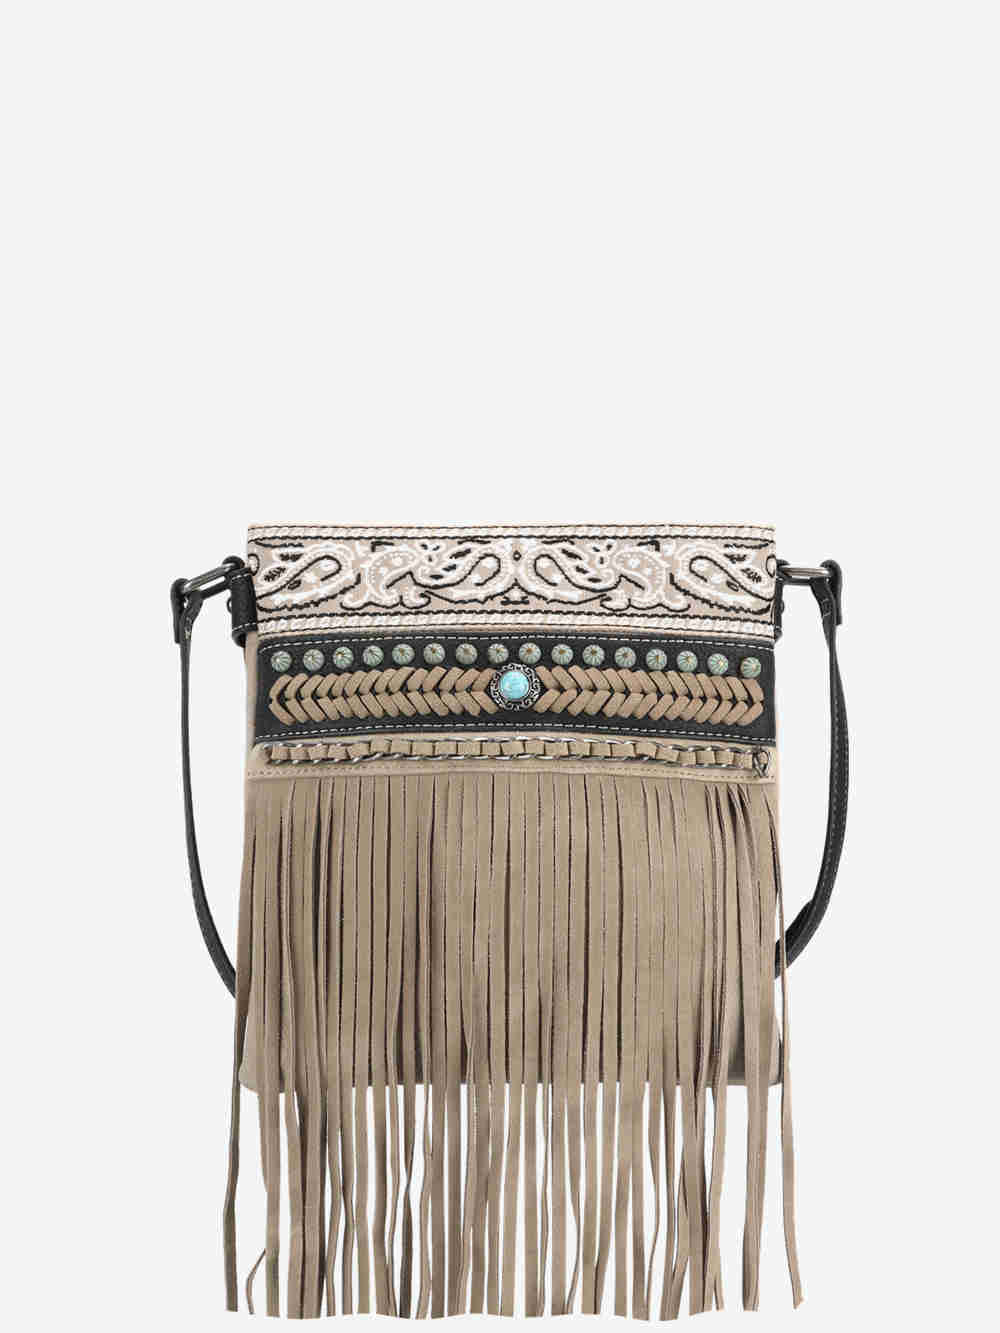 Montana West Embroidered Fringe Concealed Carry Crossbody - Montana West World